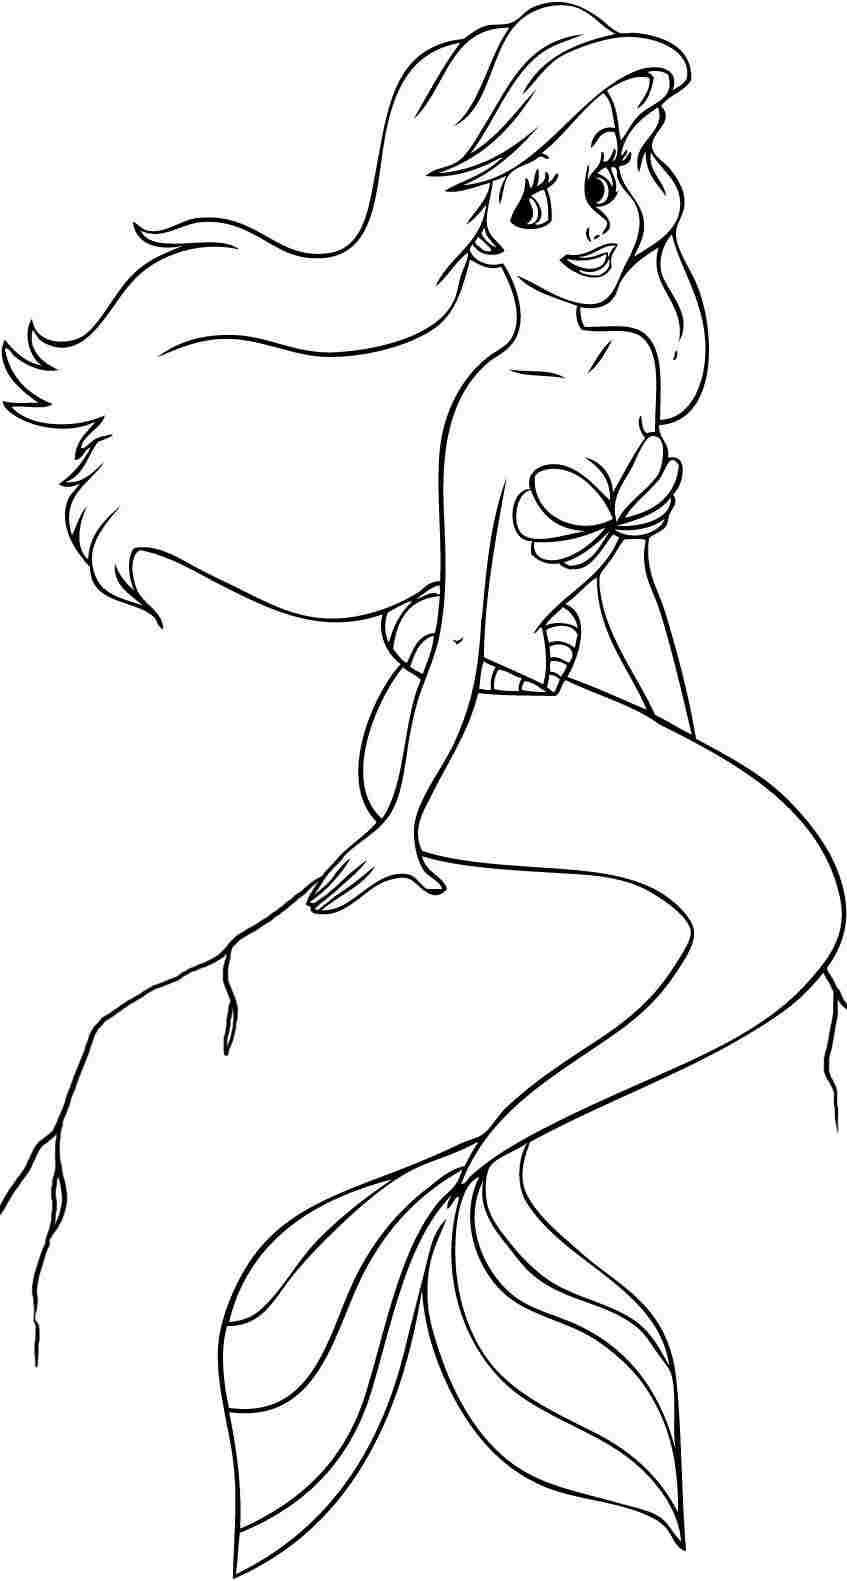 Disney Little Mermaid Coloring Pages at GetDrawings | Free download